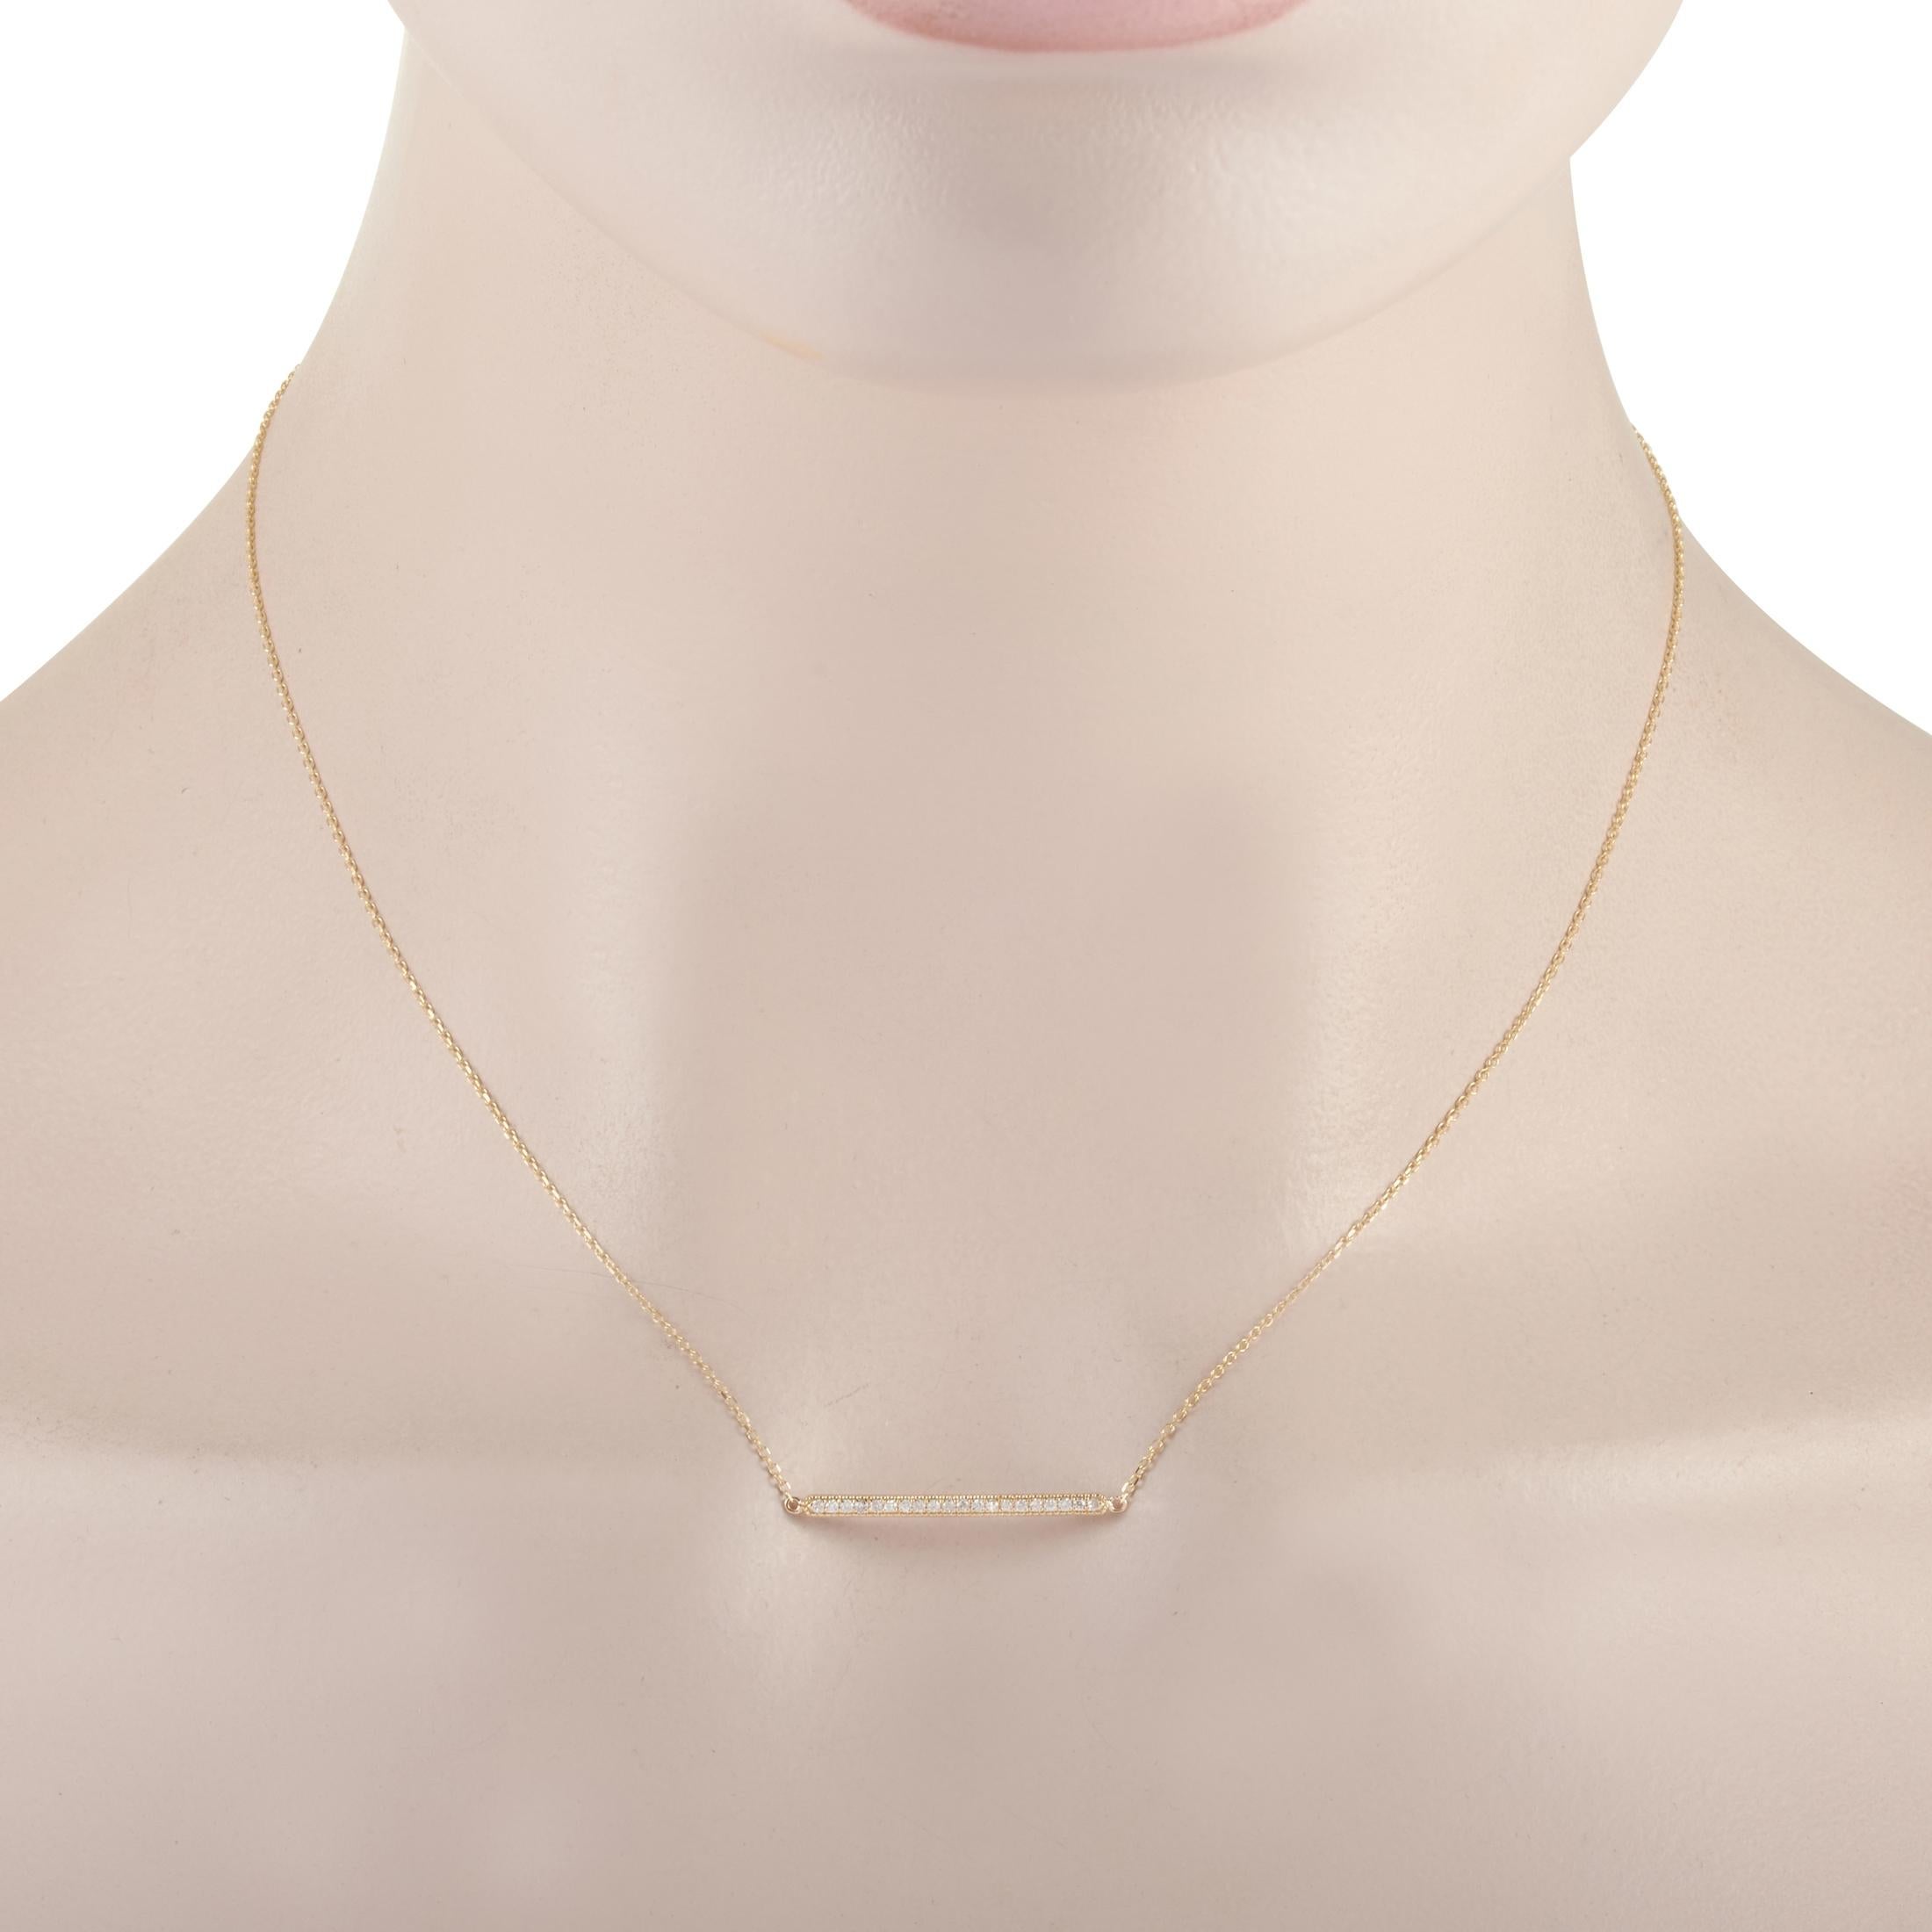 This LB Exclusive necklace is crafted from 14K yellow gold and weighs 1.7 grams. It is presented with a 15” chain and boasts a pendant that measures 0.07” in length and 1” in width. The necklace is set with diamonds that total 0.10 carats.

Offered